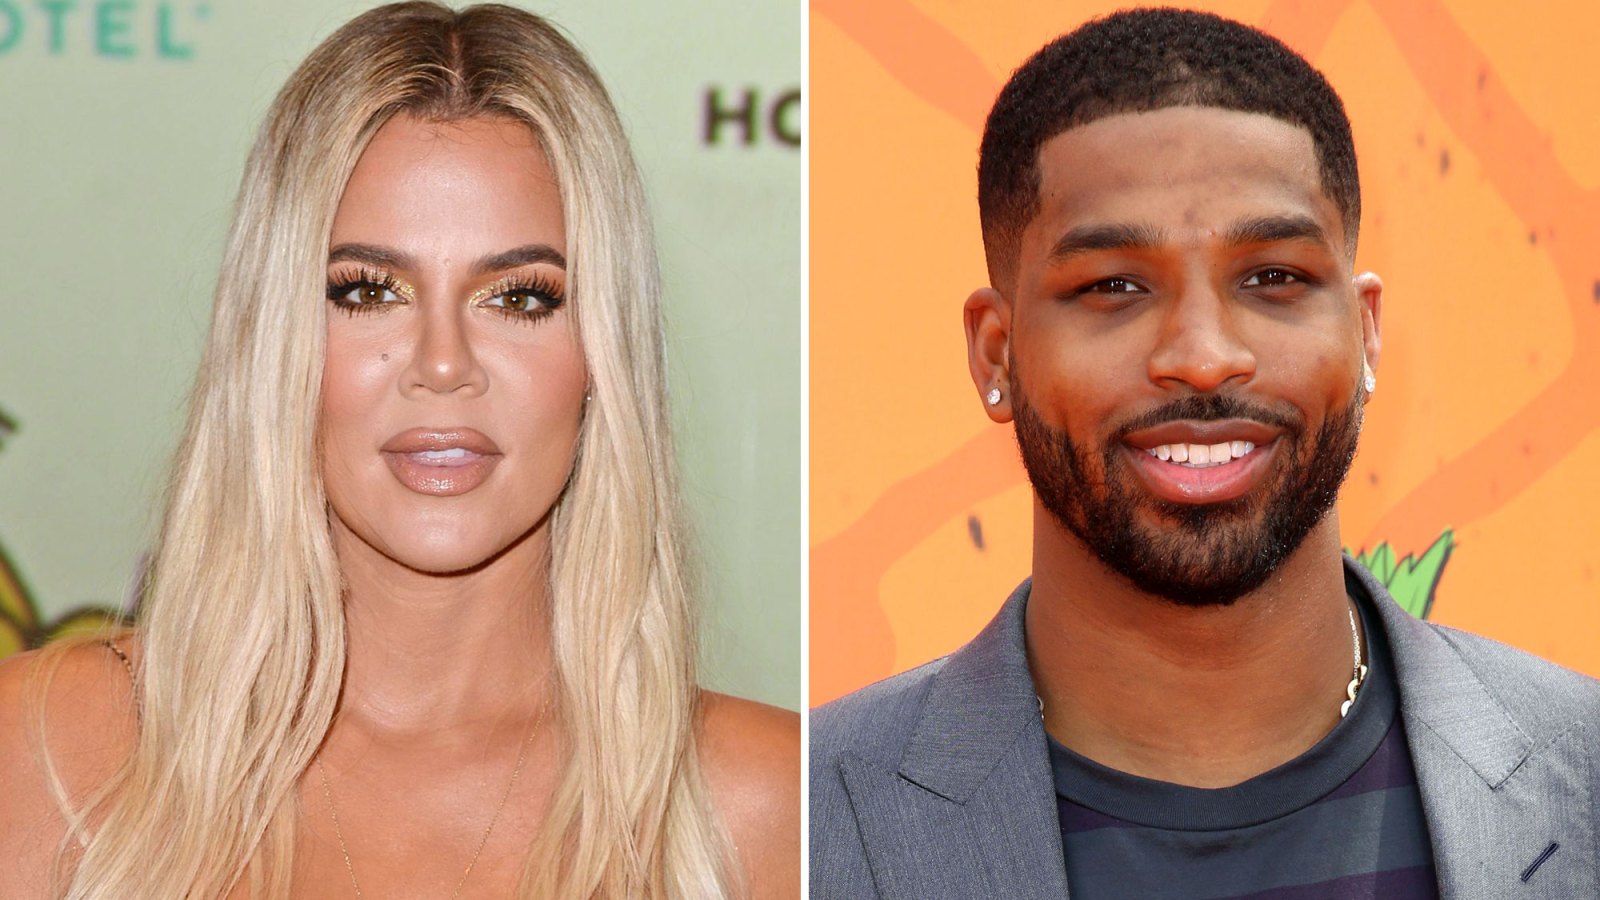 Khloe Kardashian Is ‘Really Proud’ of the ‘Coparenting Place’ She and Tristan Thompson Are InKhloe Kardashian Is ‘Really Proud’ of the ‘Coparenting Place’ She and Tristan Thompson Are In